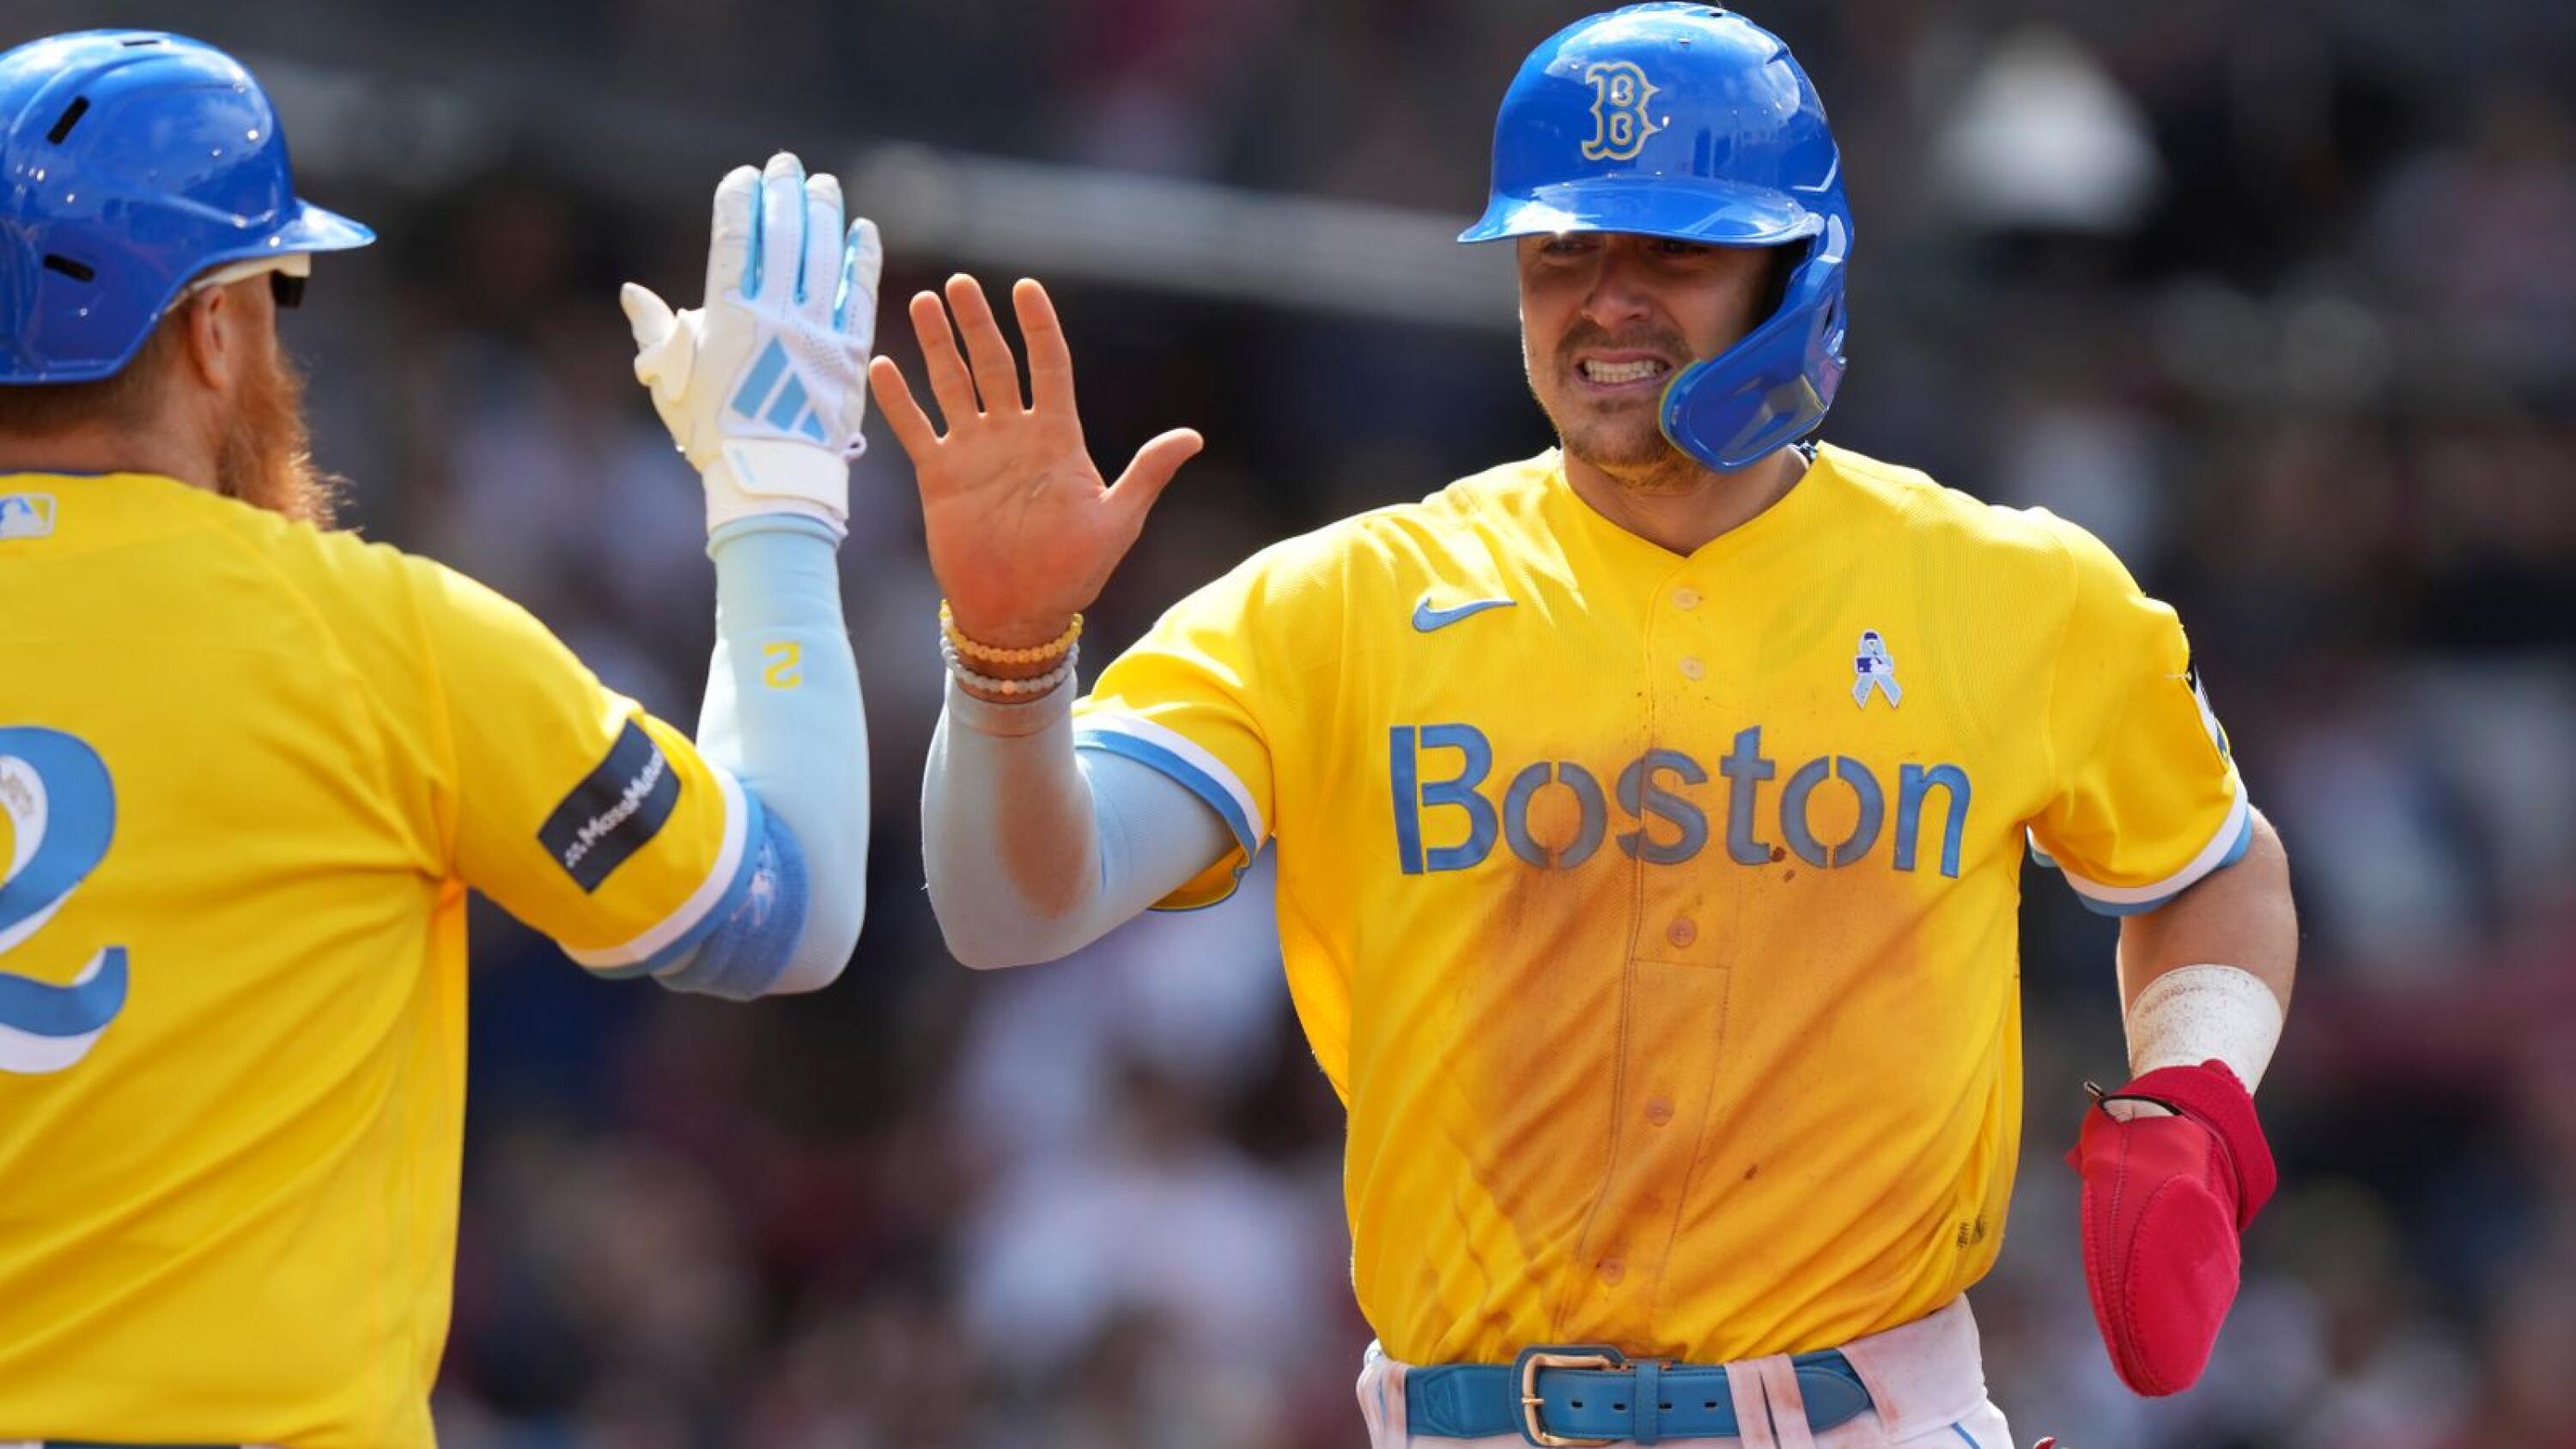 red sox uniforms yellow and blue